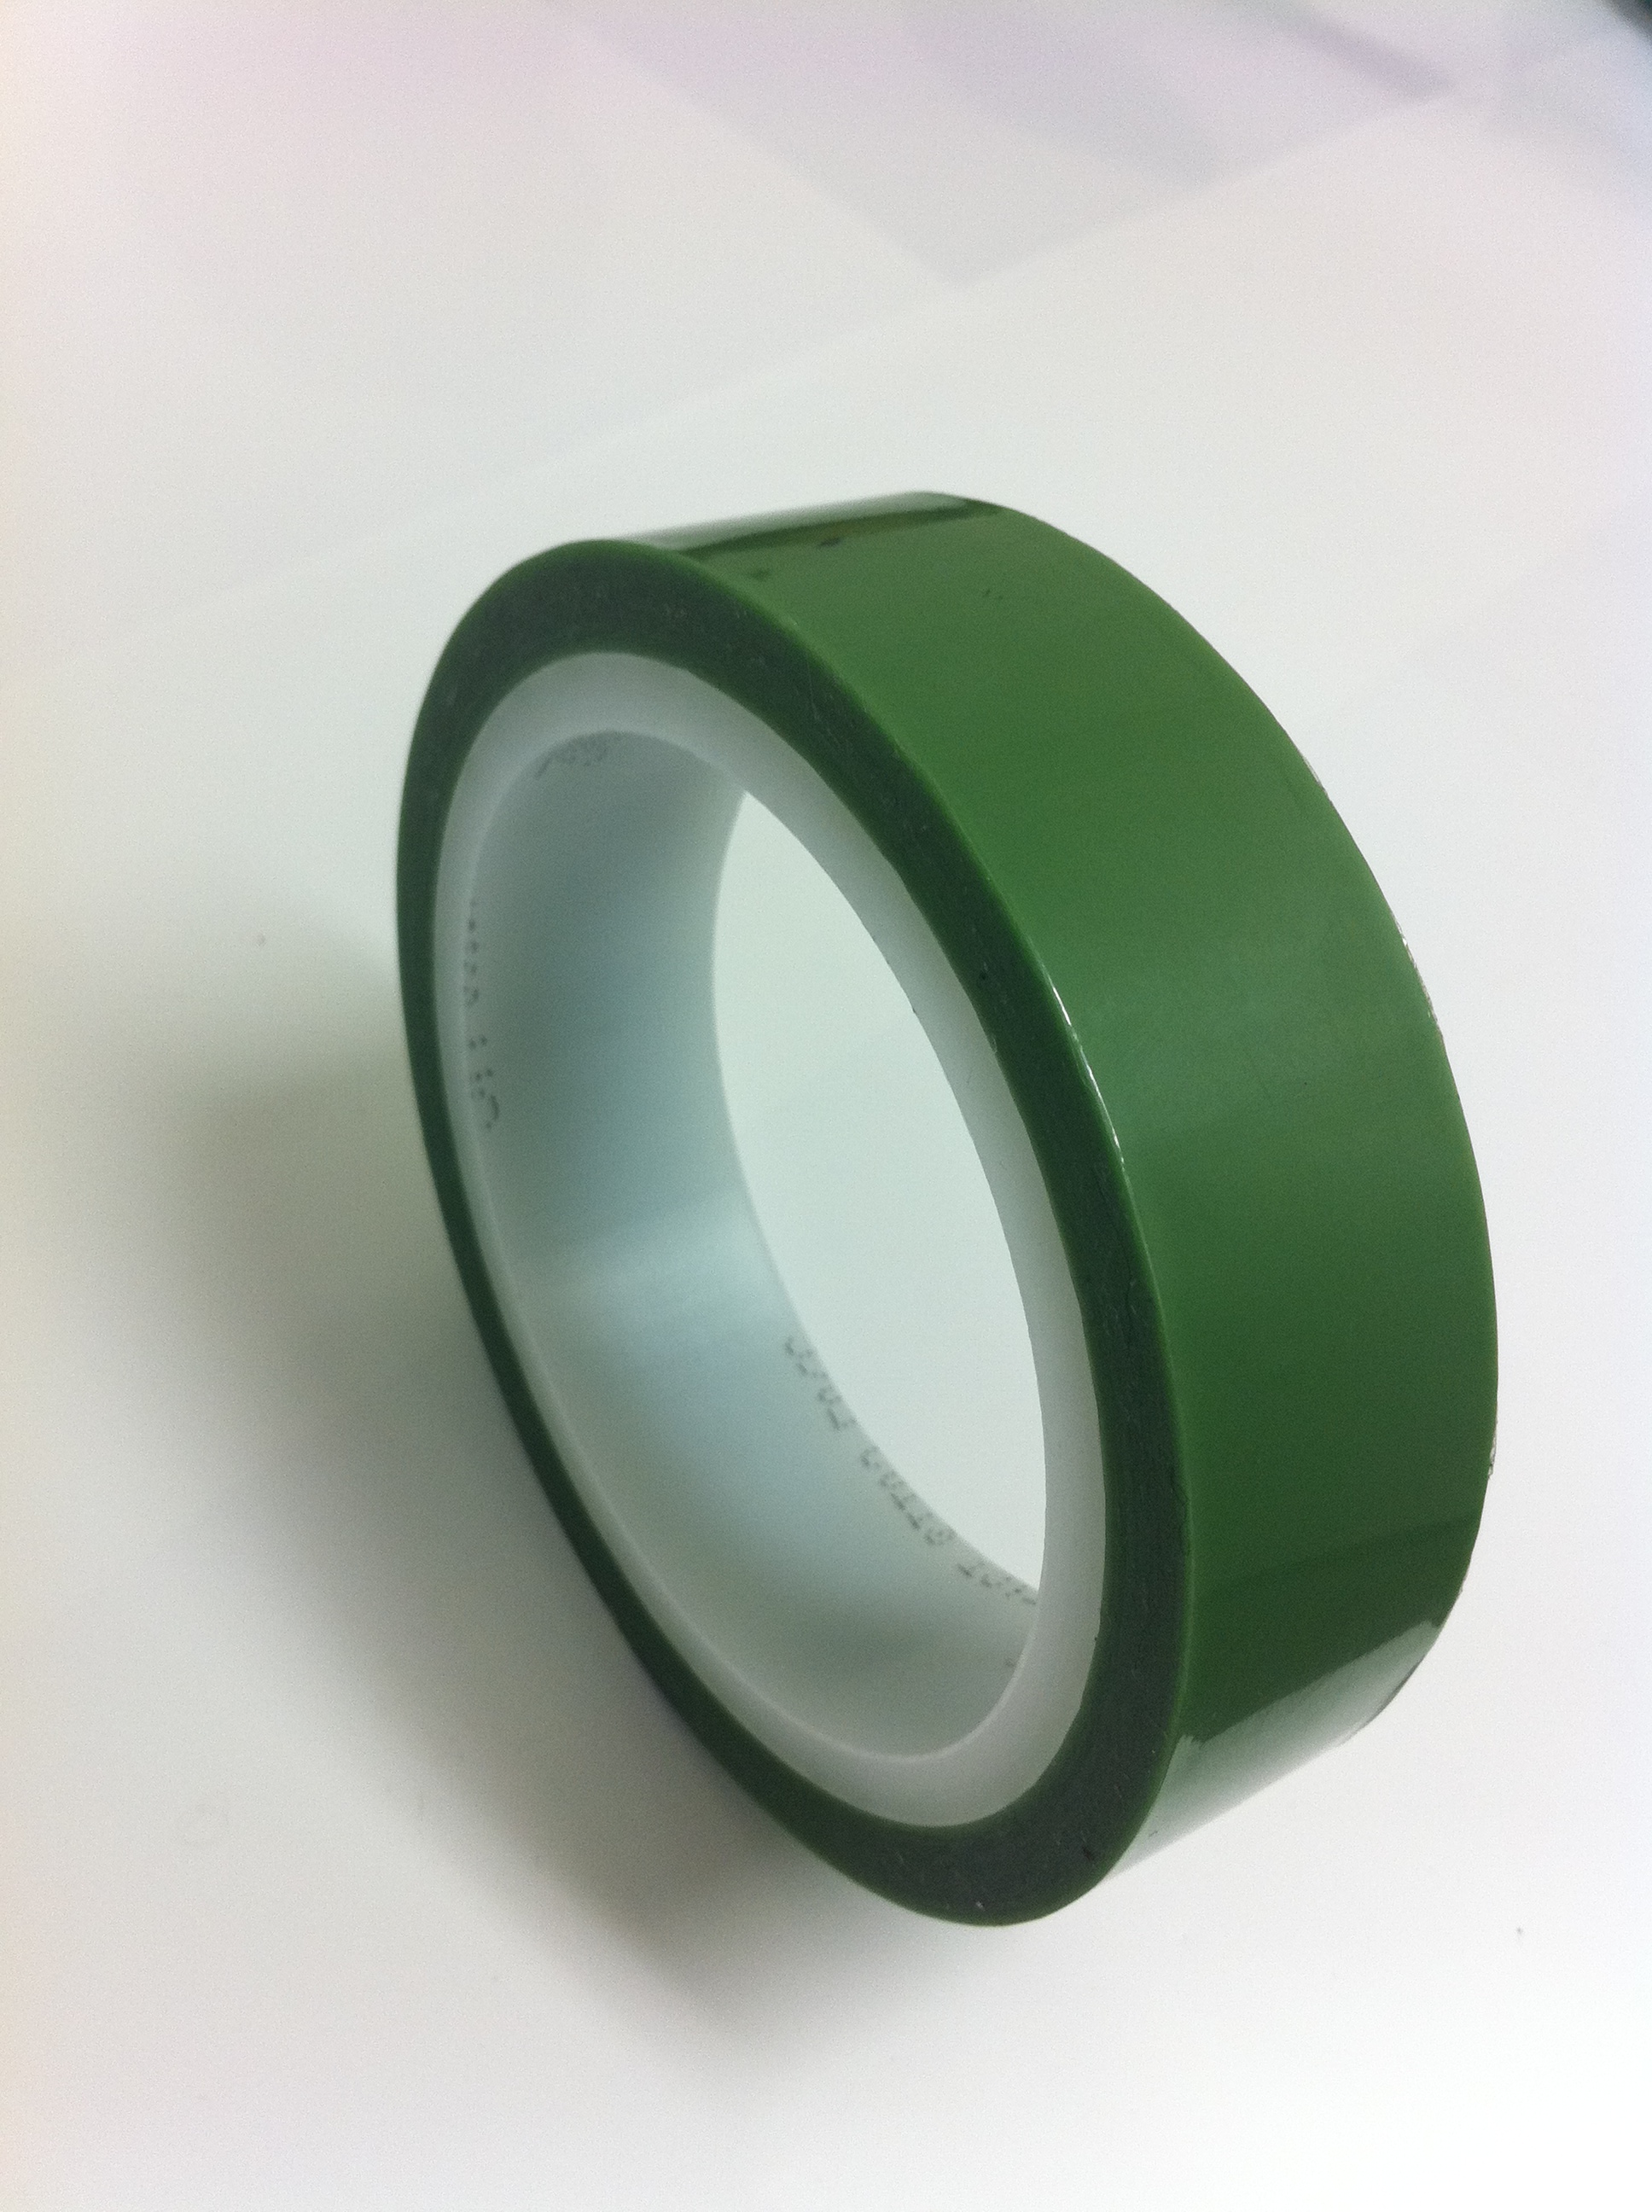 1 Roll 65mm x 100ft Green PET Tape High Temperature Heat Resistant